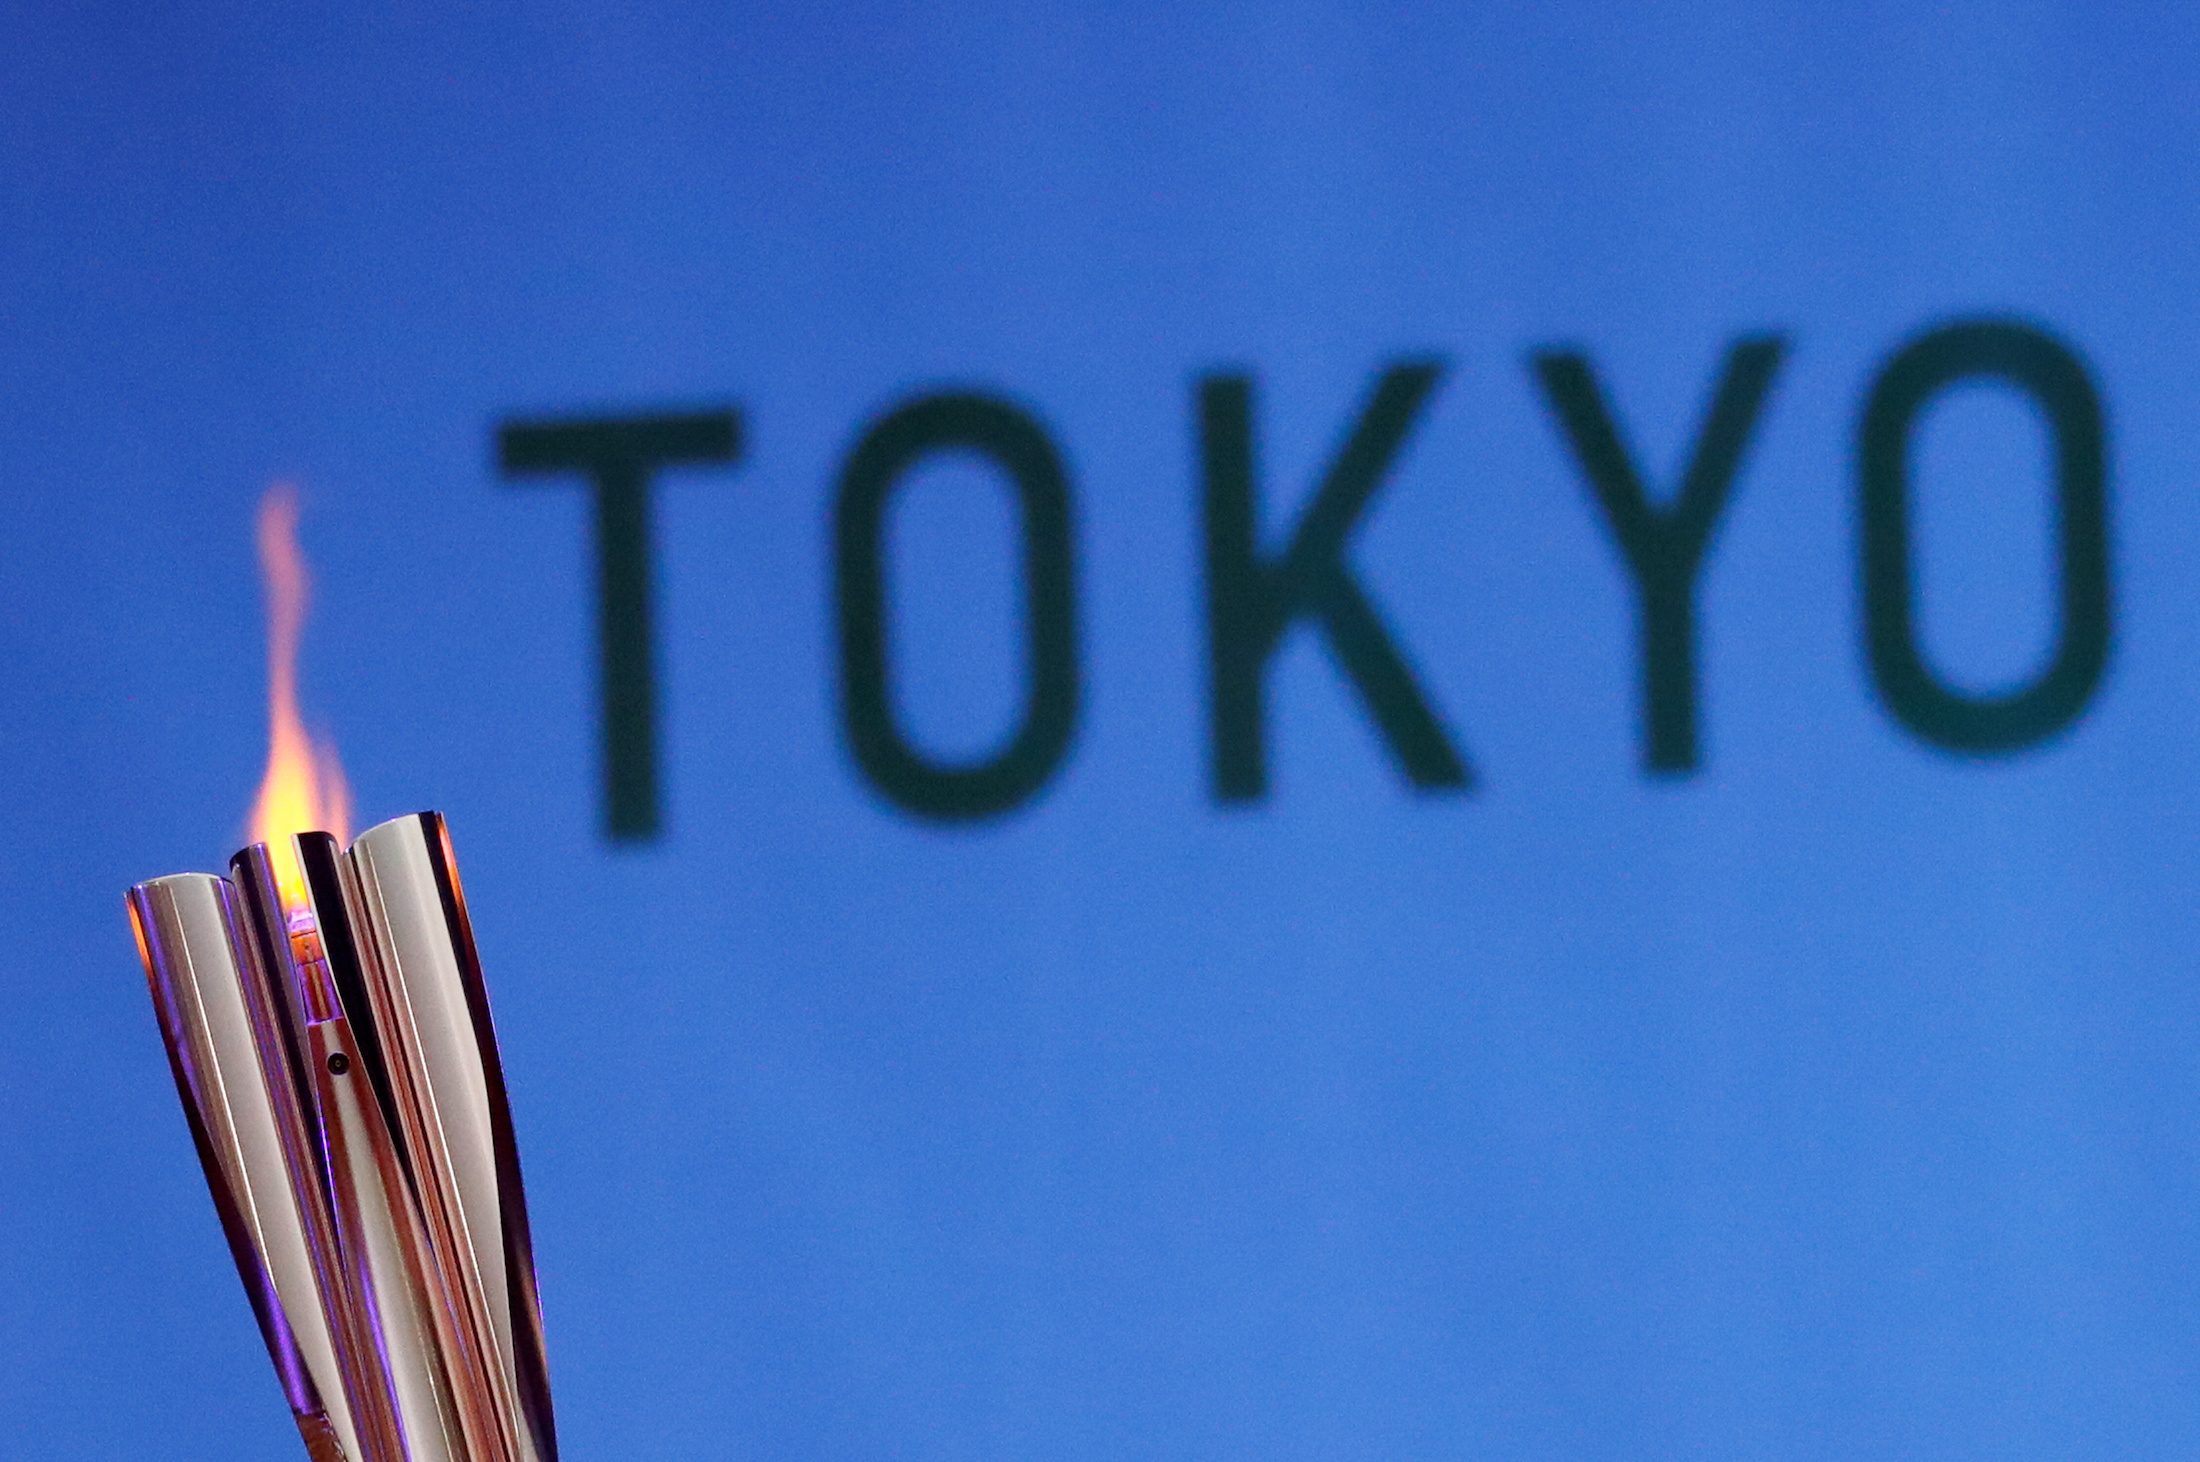 6 Tokyo Olympics torch staffers diagnosed with COVID-19